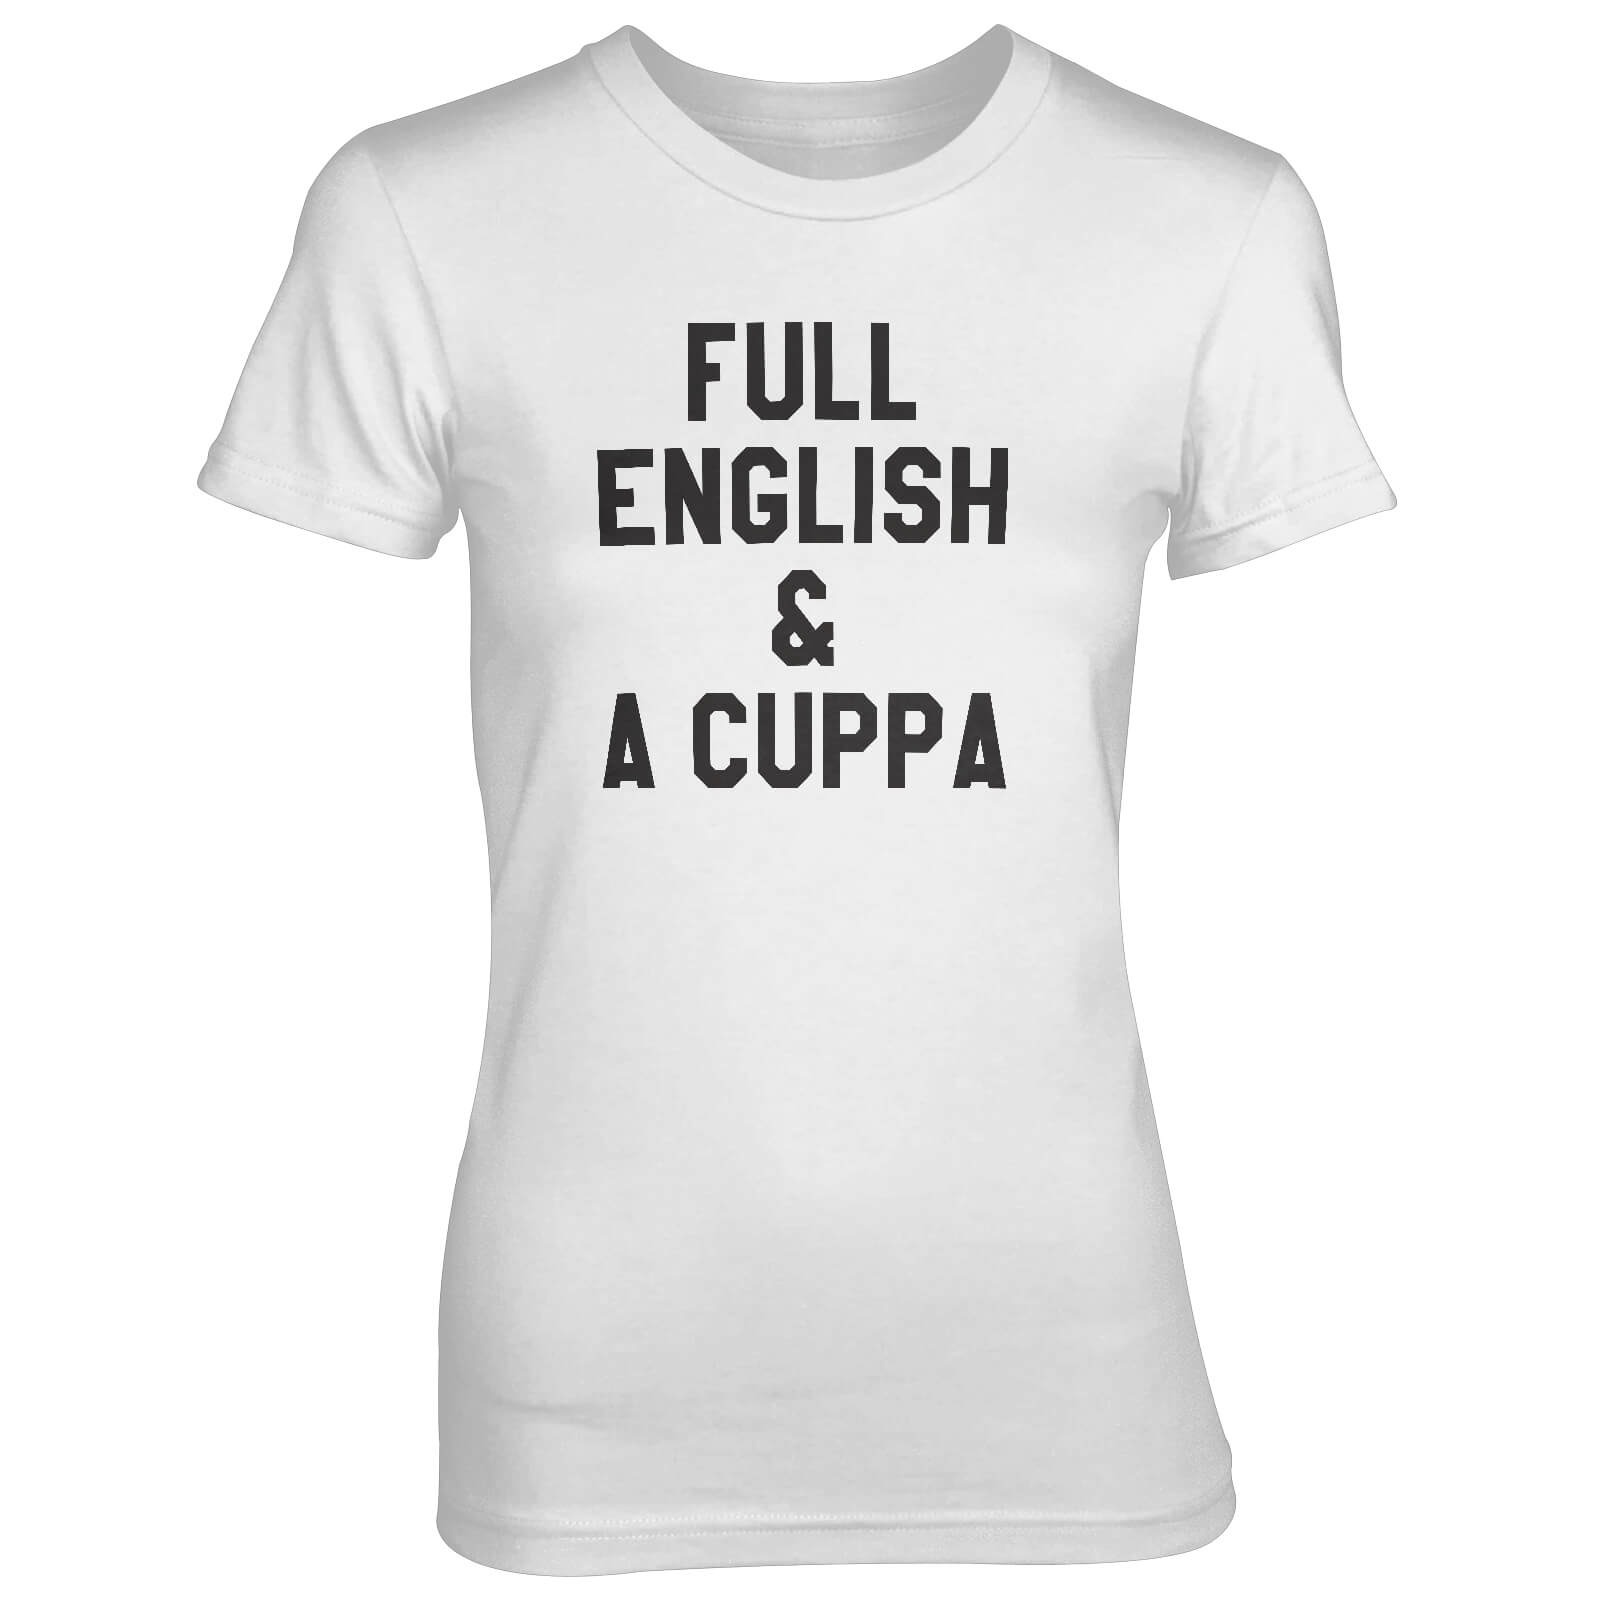 Full English And A Cuppa Women's White T-Shirt - S - White